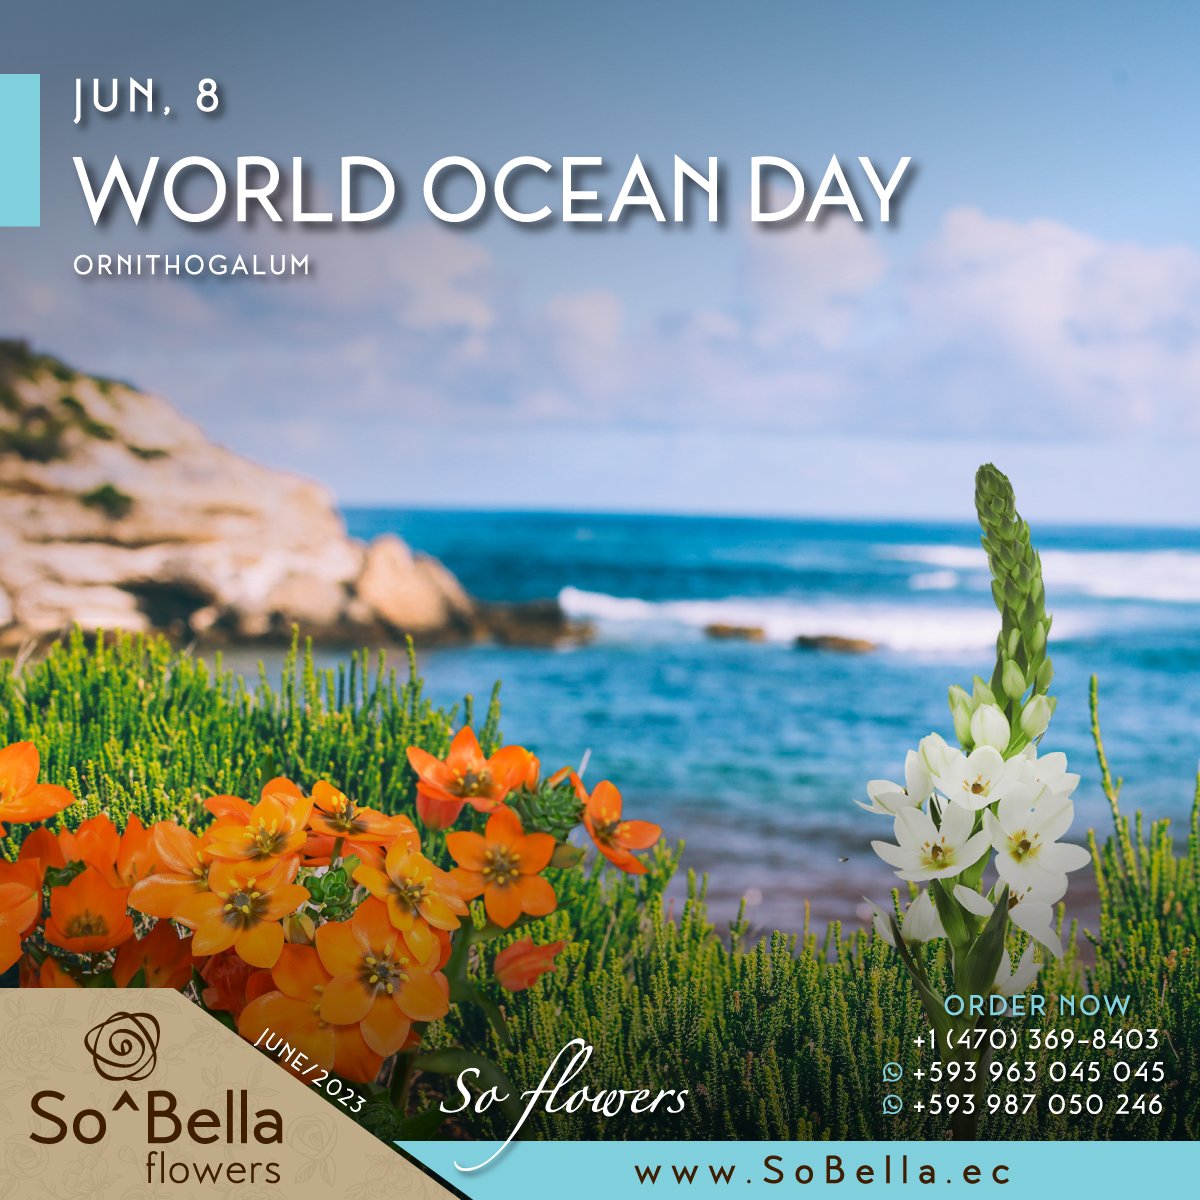 Happy World Ocean Day!
Contact us sobella.ec
Fresher premium #flowers means better #events #FarmDirect from Ecuador
🌷💐🌻🎁🌺🌸
#FreshCutRoses for your #EventDecorations #Wedding #BridalBouquets #Centerpieces #EventPlanner #bride #lifestyle #WorldOceansDay